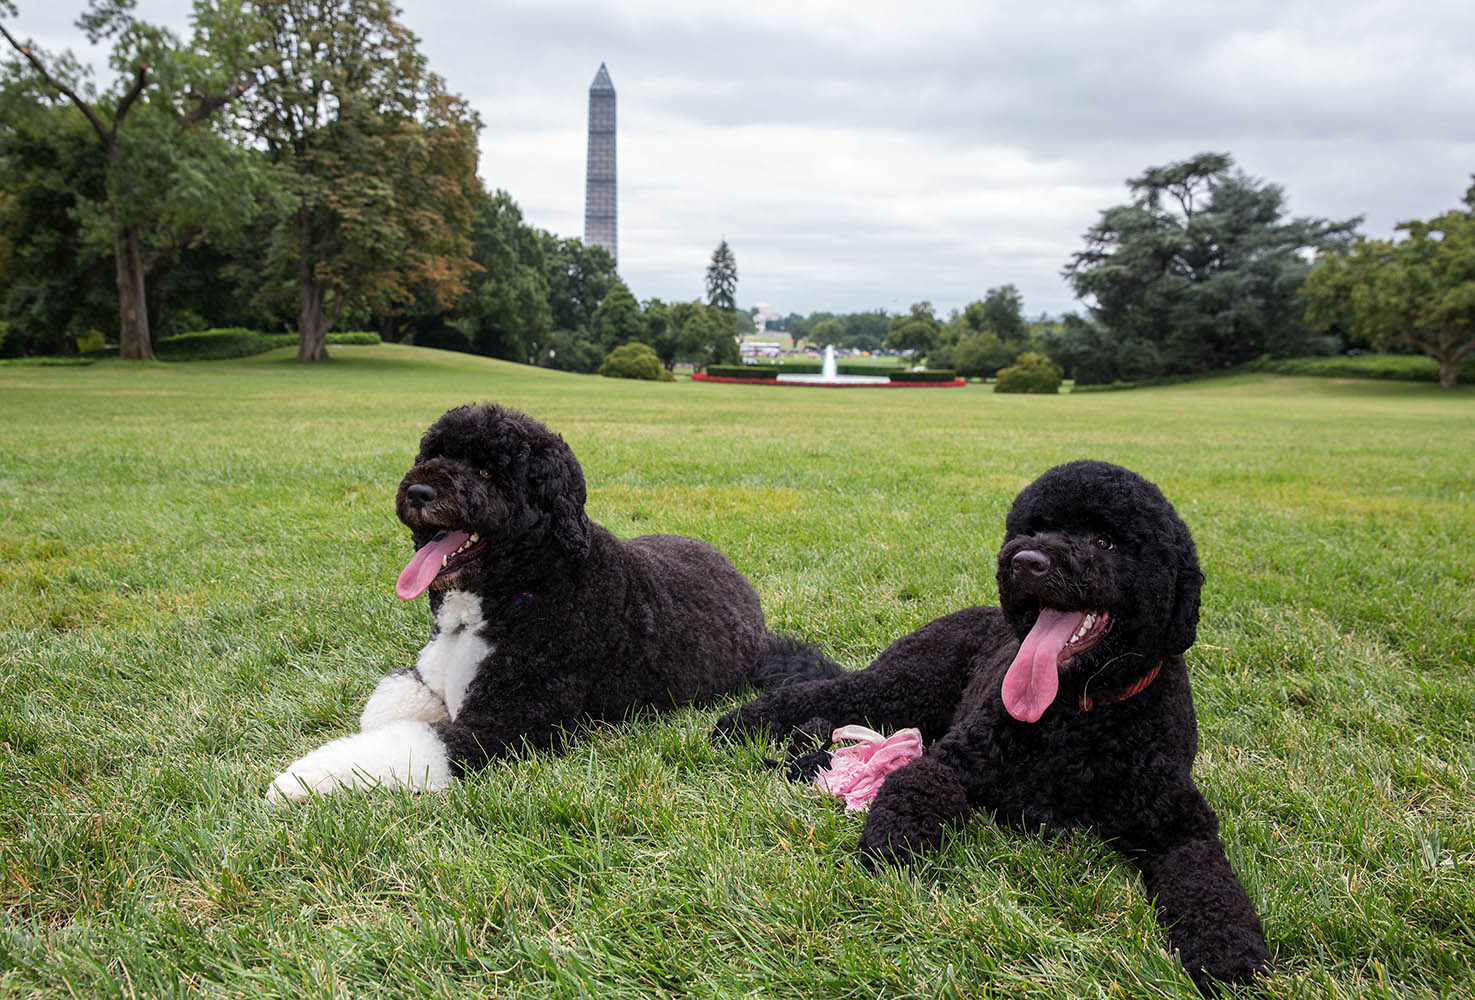 Aug. 19, 2013. This photo released by the White House shows Bo, left, and Sunny, the Obama family dogs, on the South Lawn of the White House. (Pete Souza—The White House/AP)